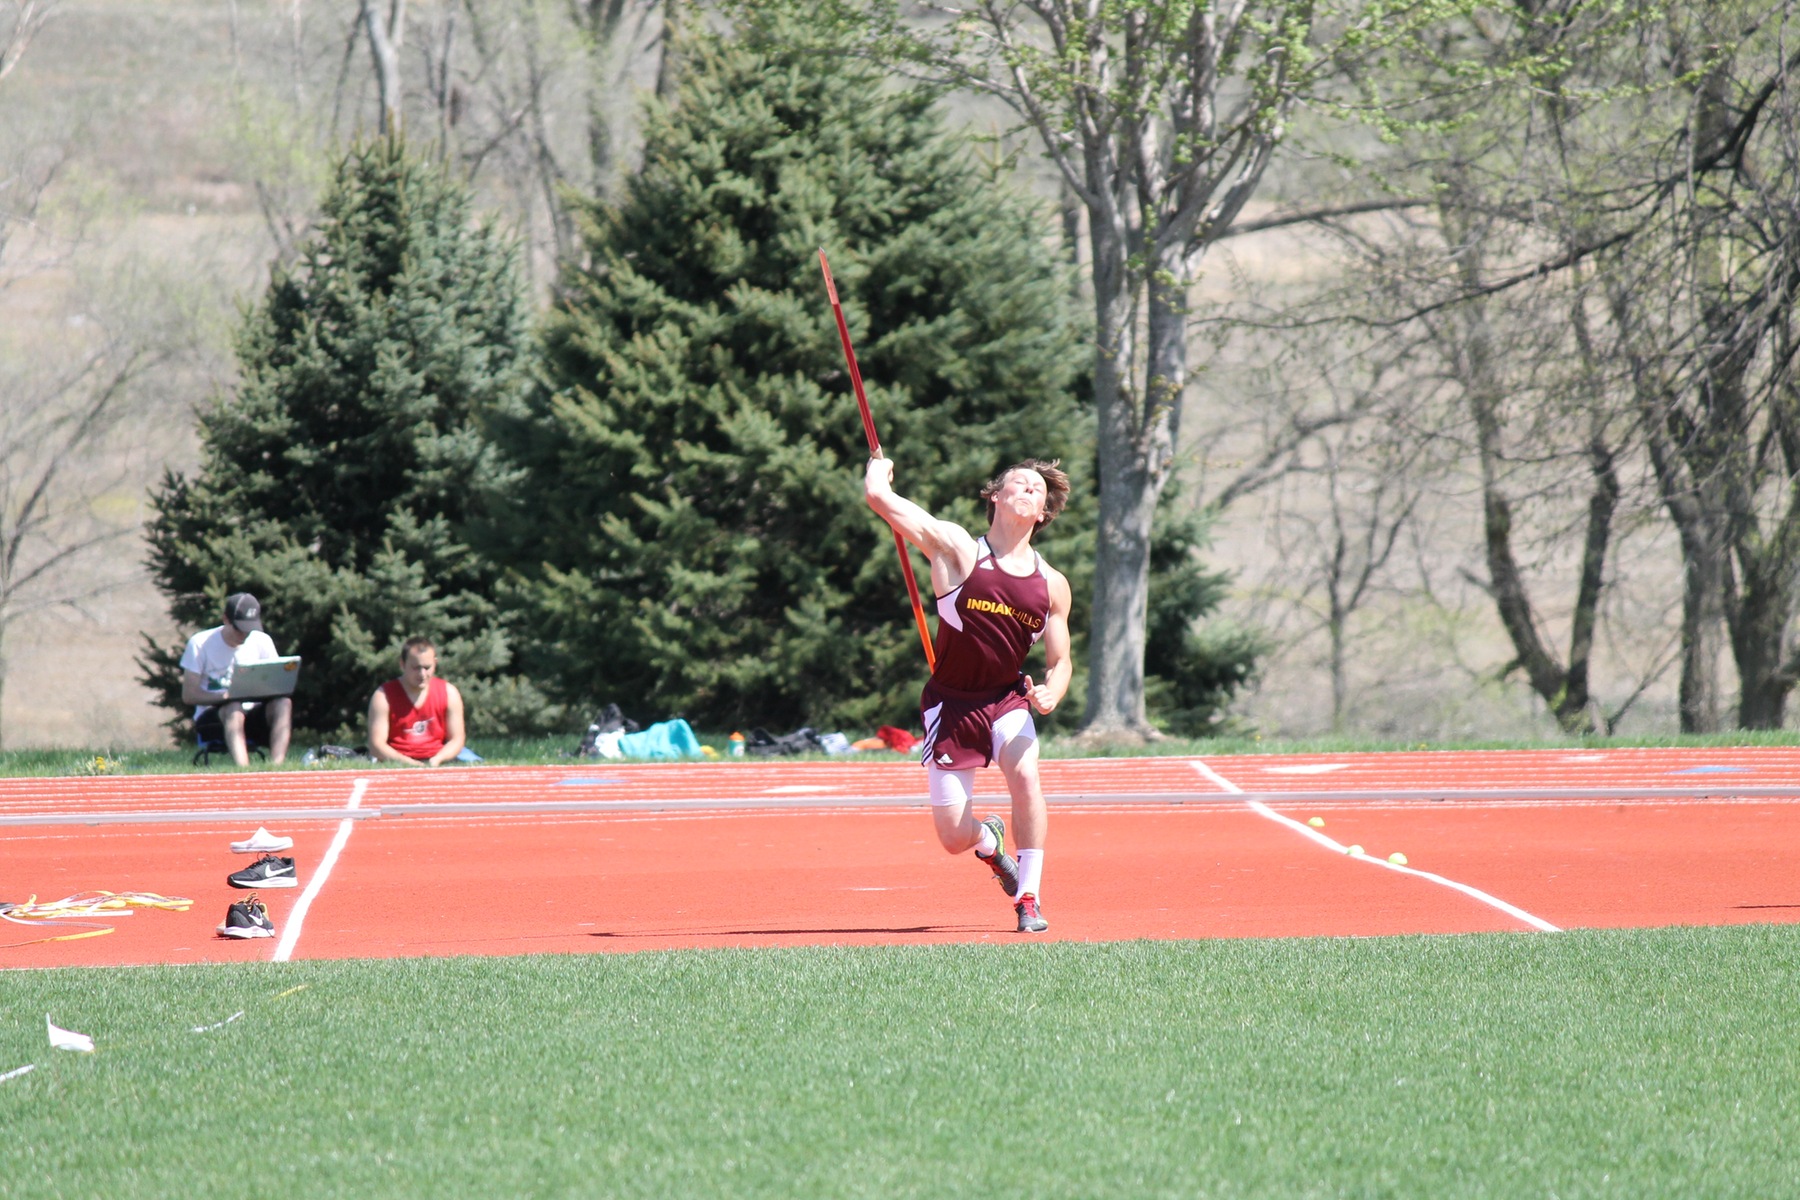 Doug Turner placed third at the Region XI Championships in the javelin throw.